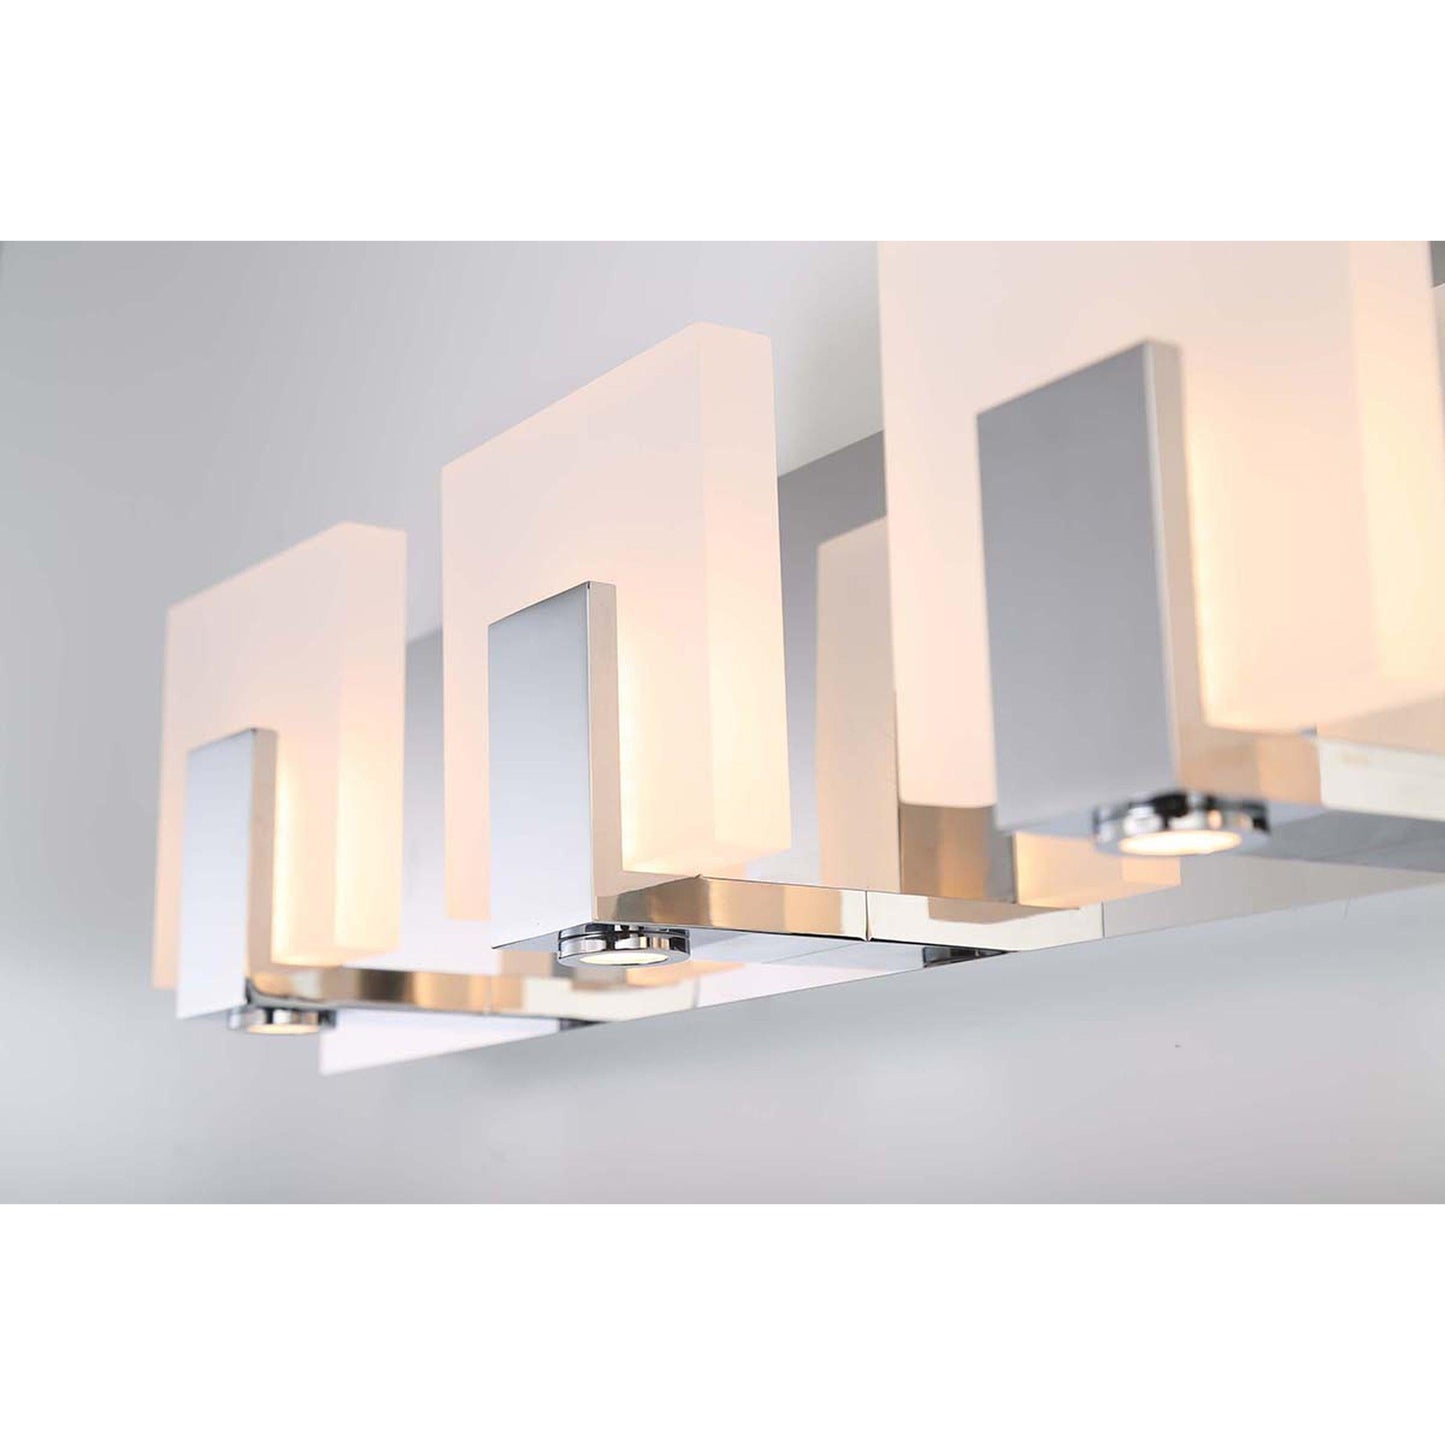 Eurofase Lighting Canmore 20" 3-light Dimmable Integrated LED Chrome Bath Bar With Frosted Acrylic Shades